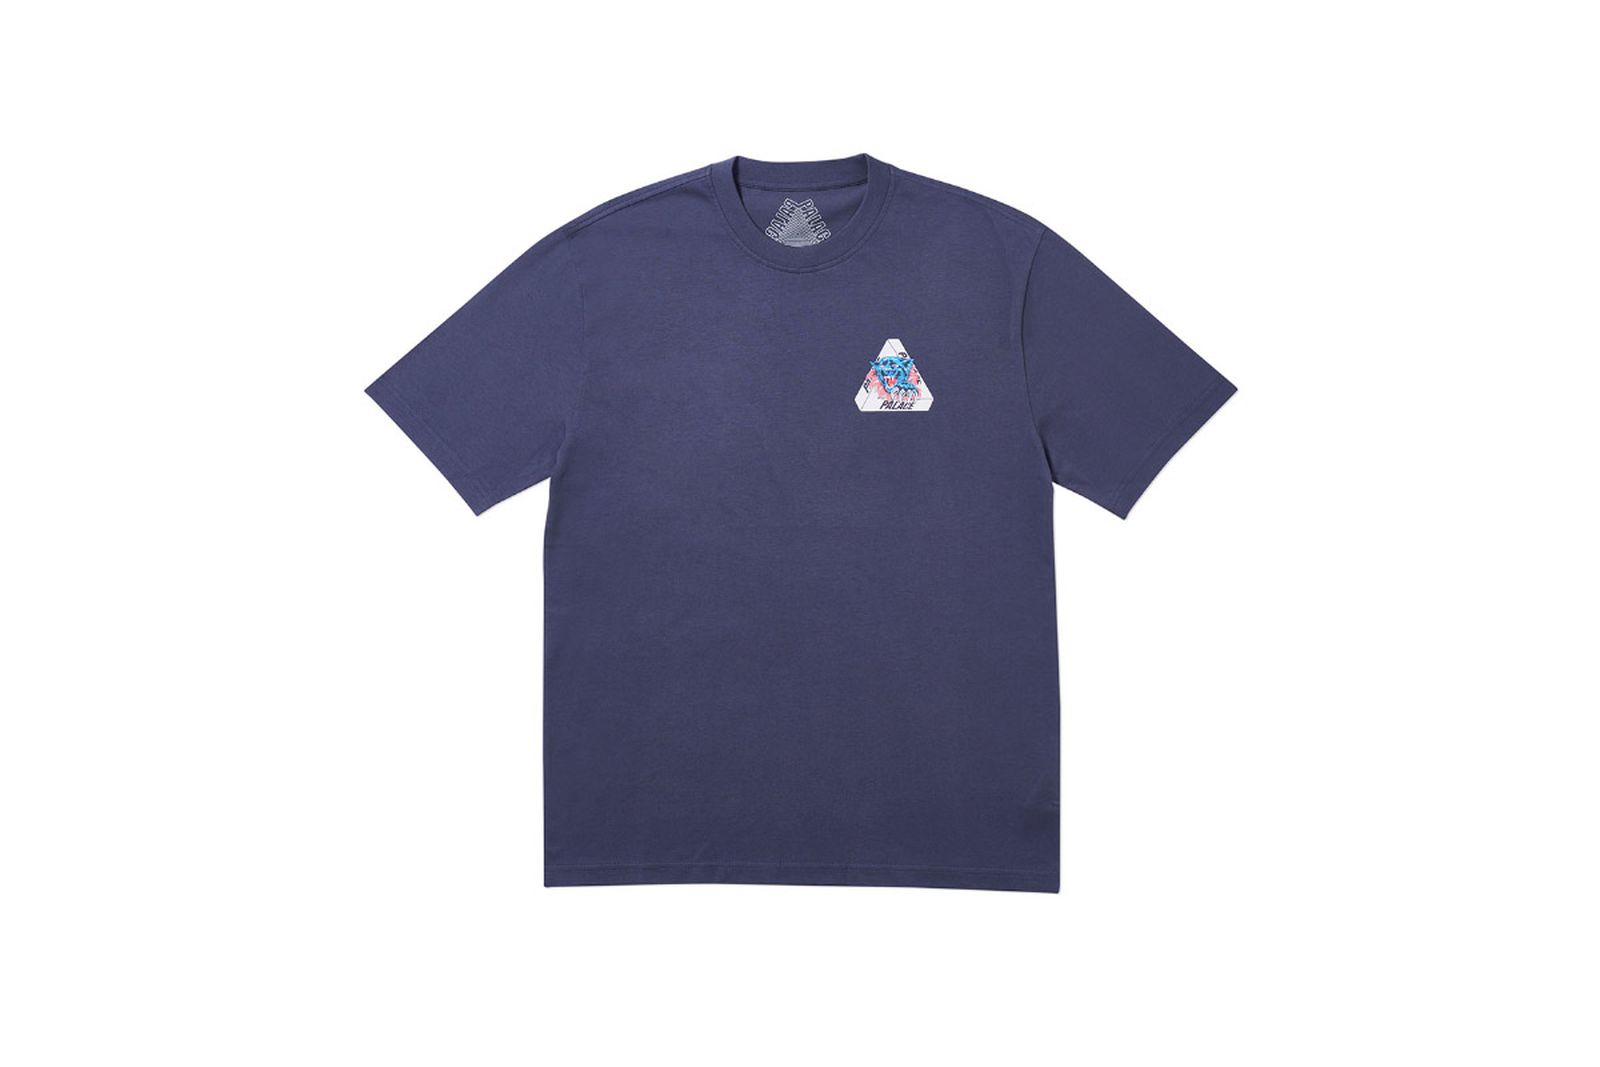 Palace Fall 2019: Every T-Shirt & Longsleeve in the Collection